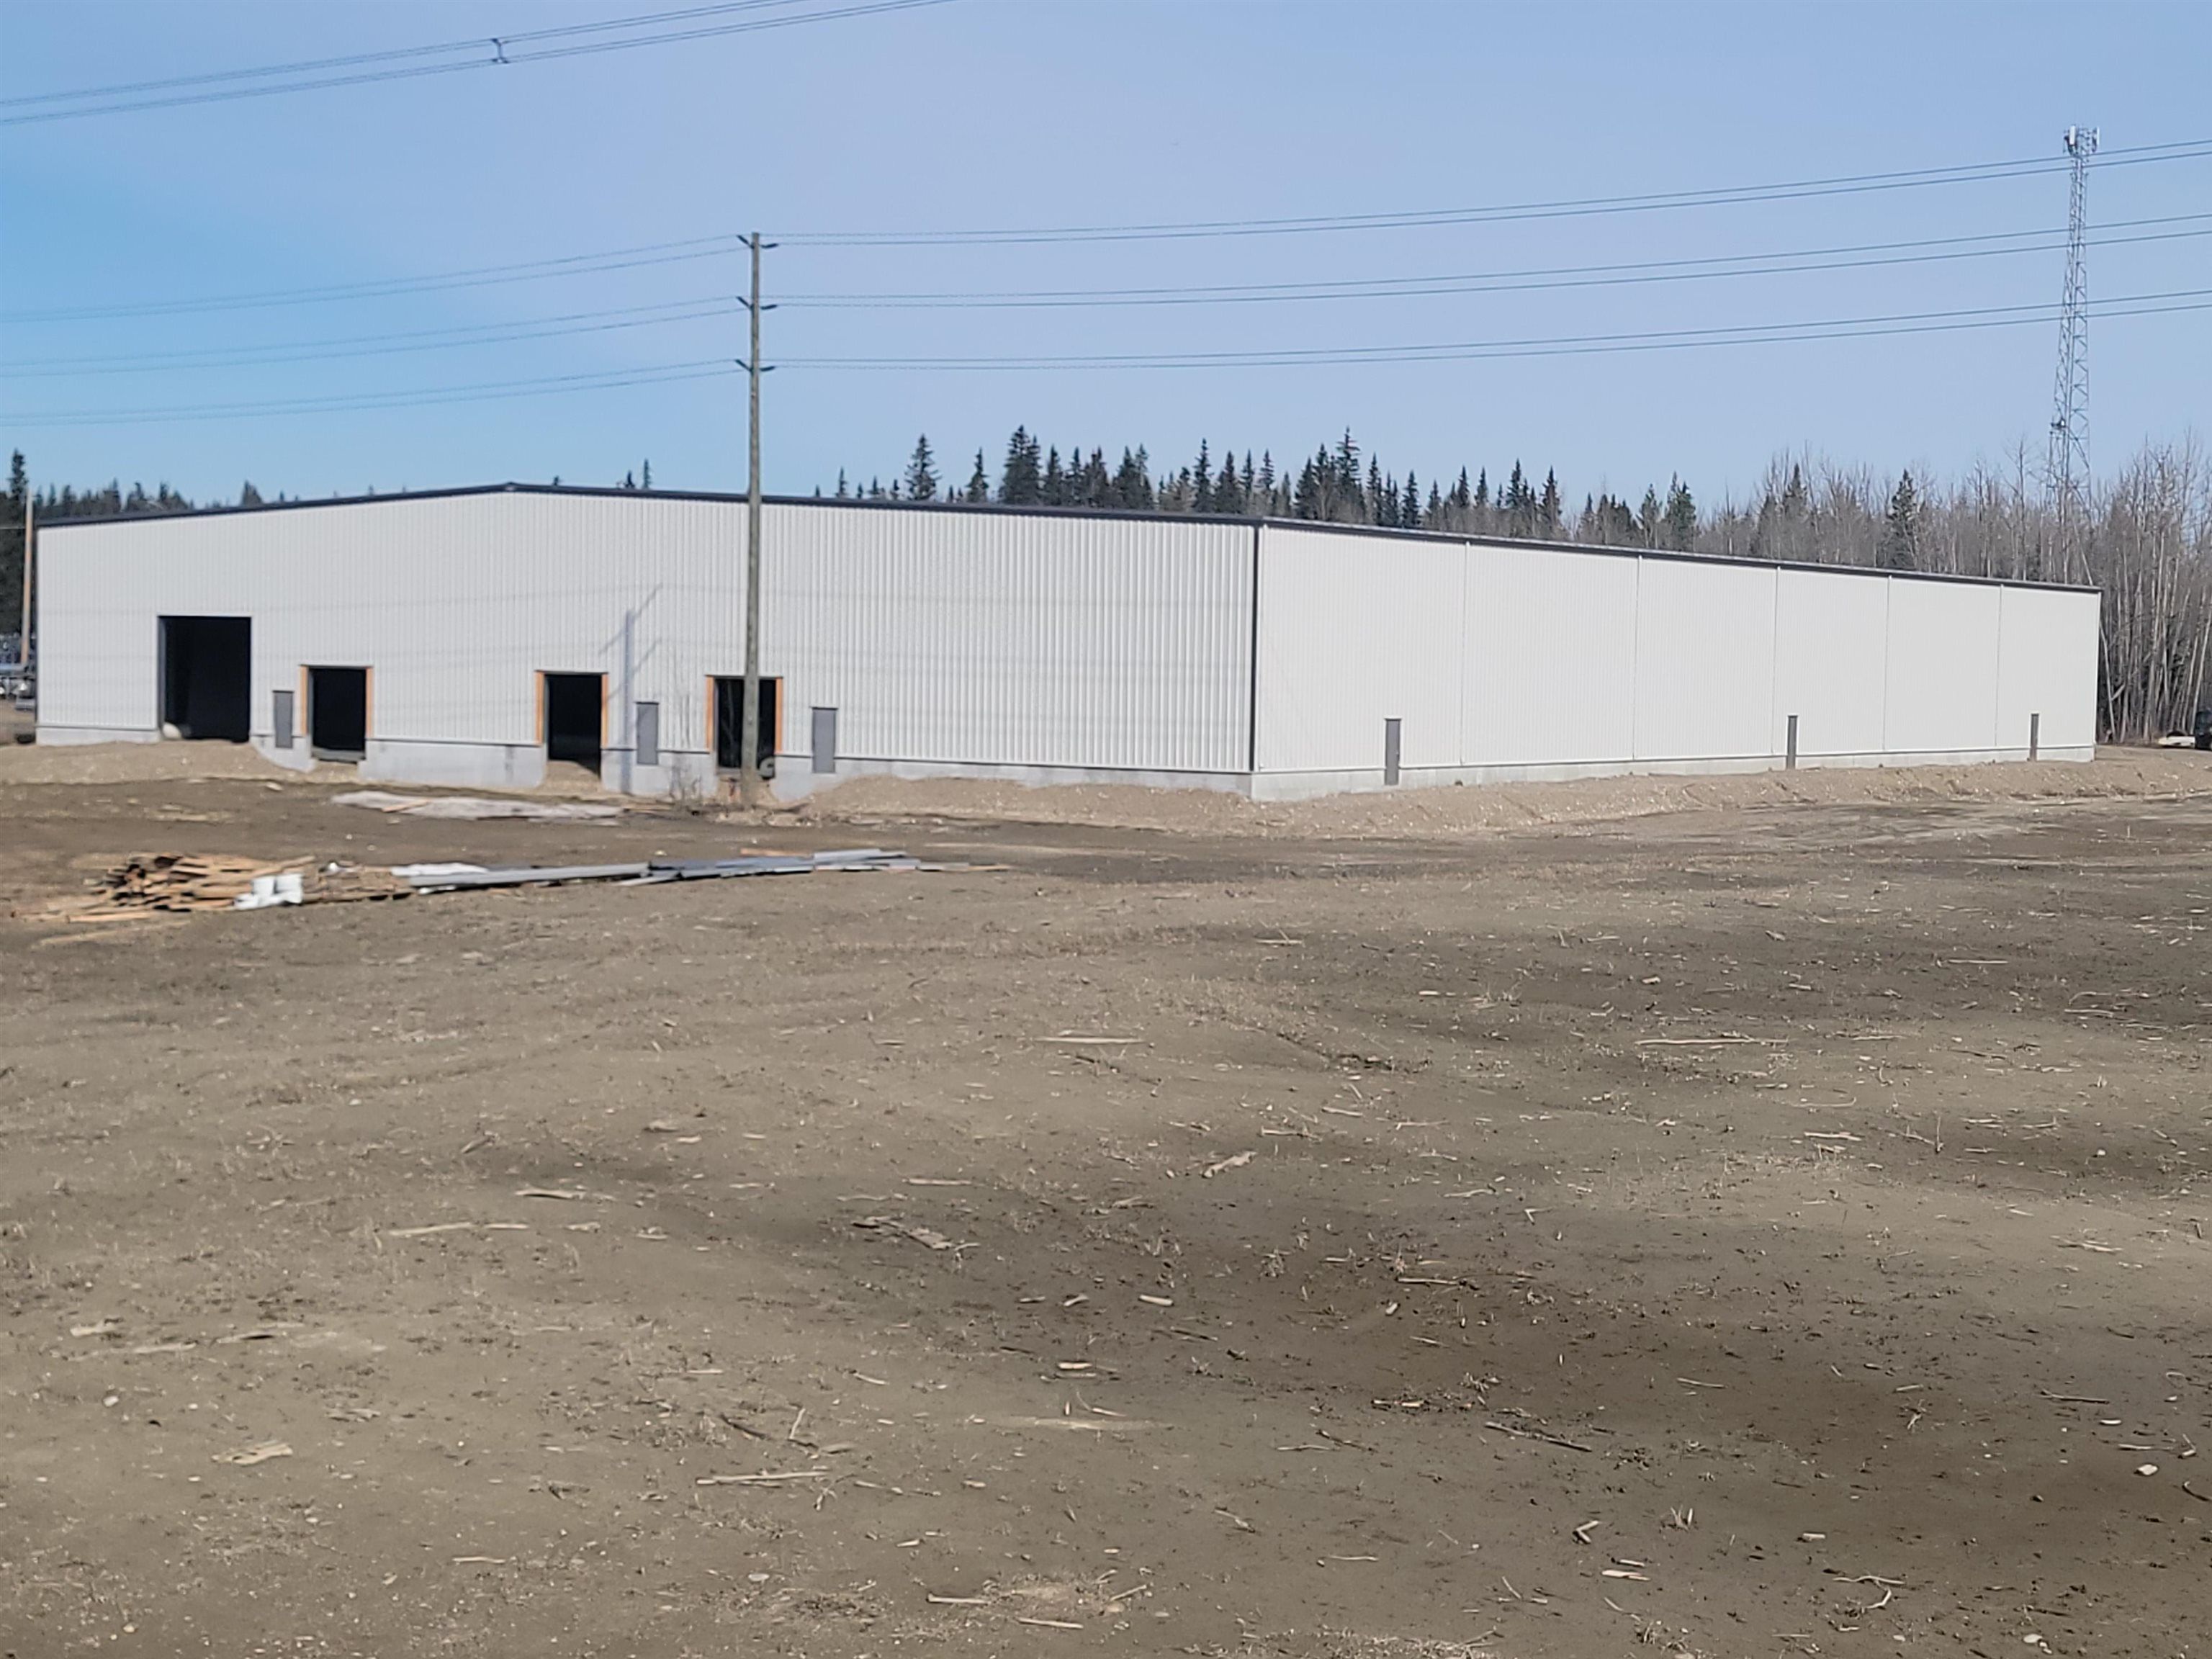 Main Photo: 8875 WILLOW CALE Road in Prince George: BCR Industrial Industrial for lease (PG City South East)  : MLS®# C8051871